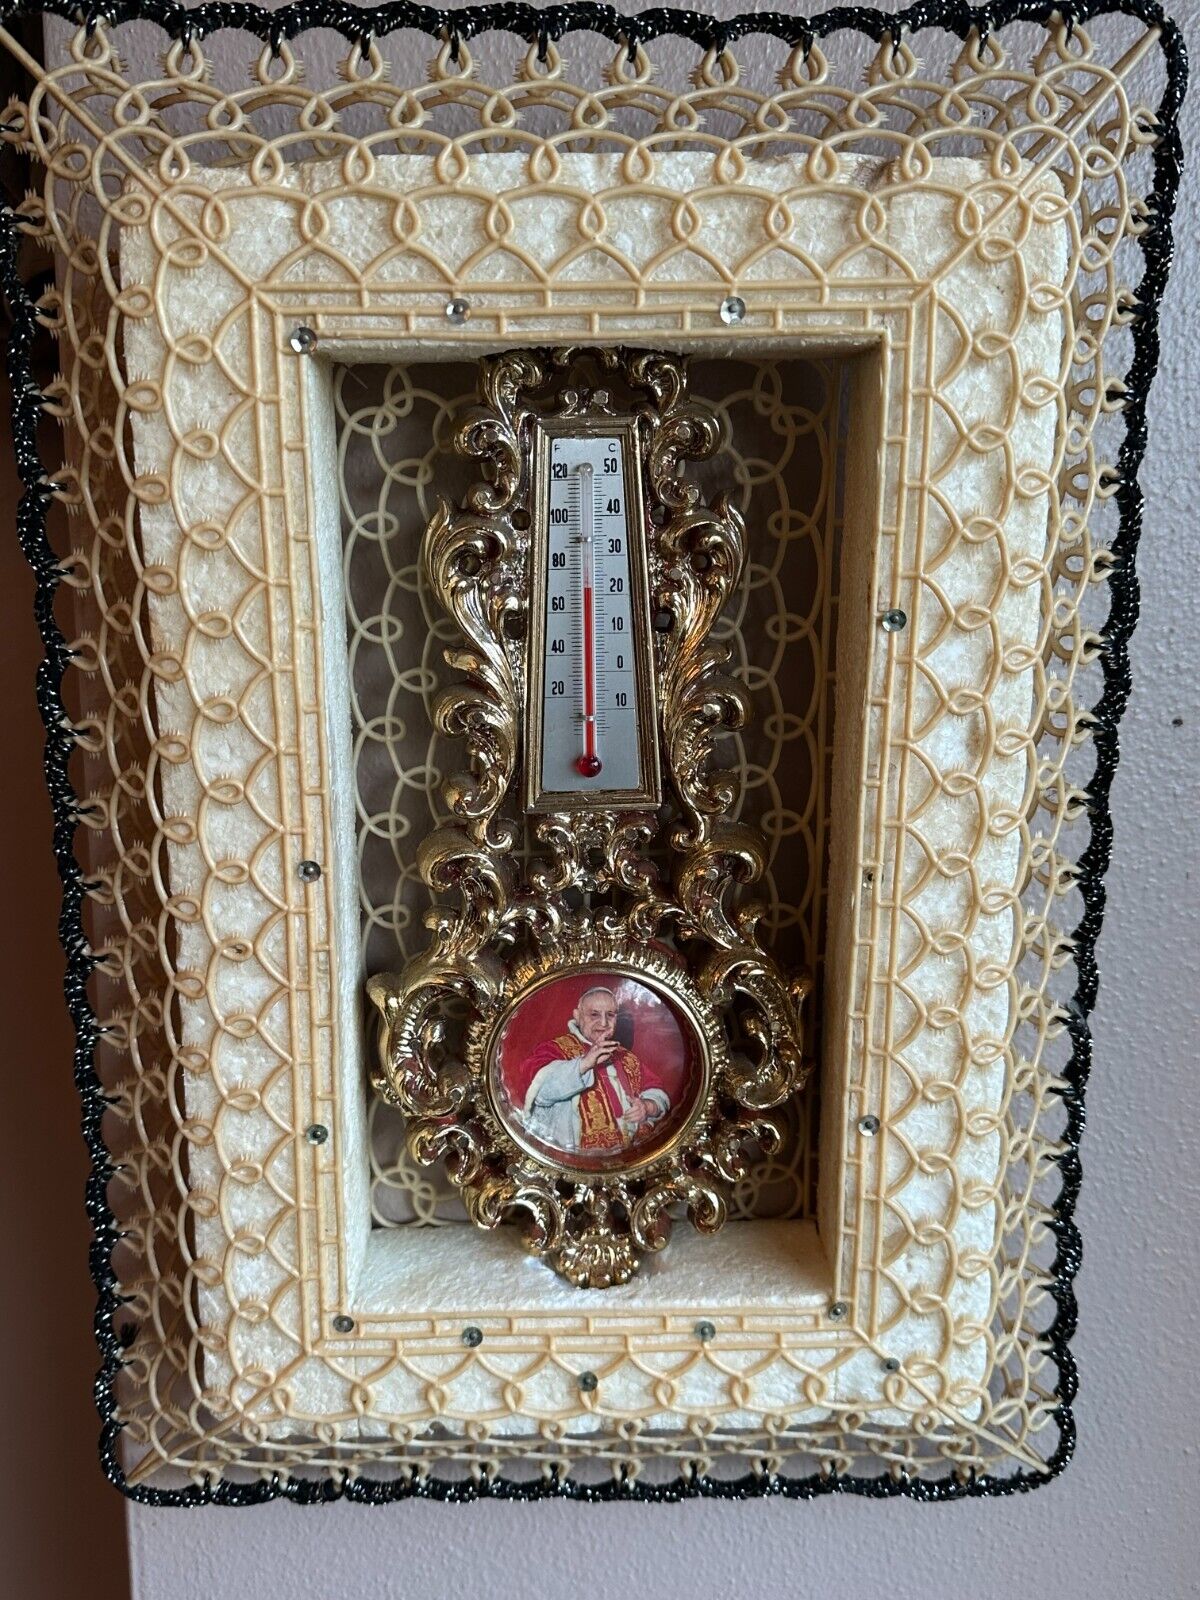 VTG 1958-1963 MCM Made in Italy POPE Photo Thermometer Framed Pope John XXIII